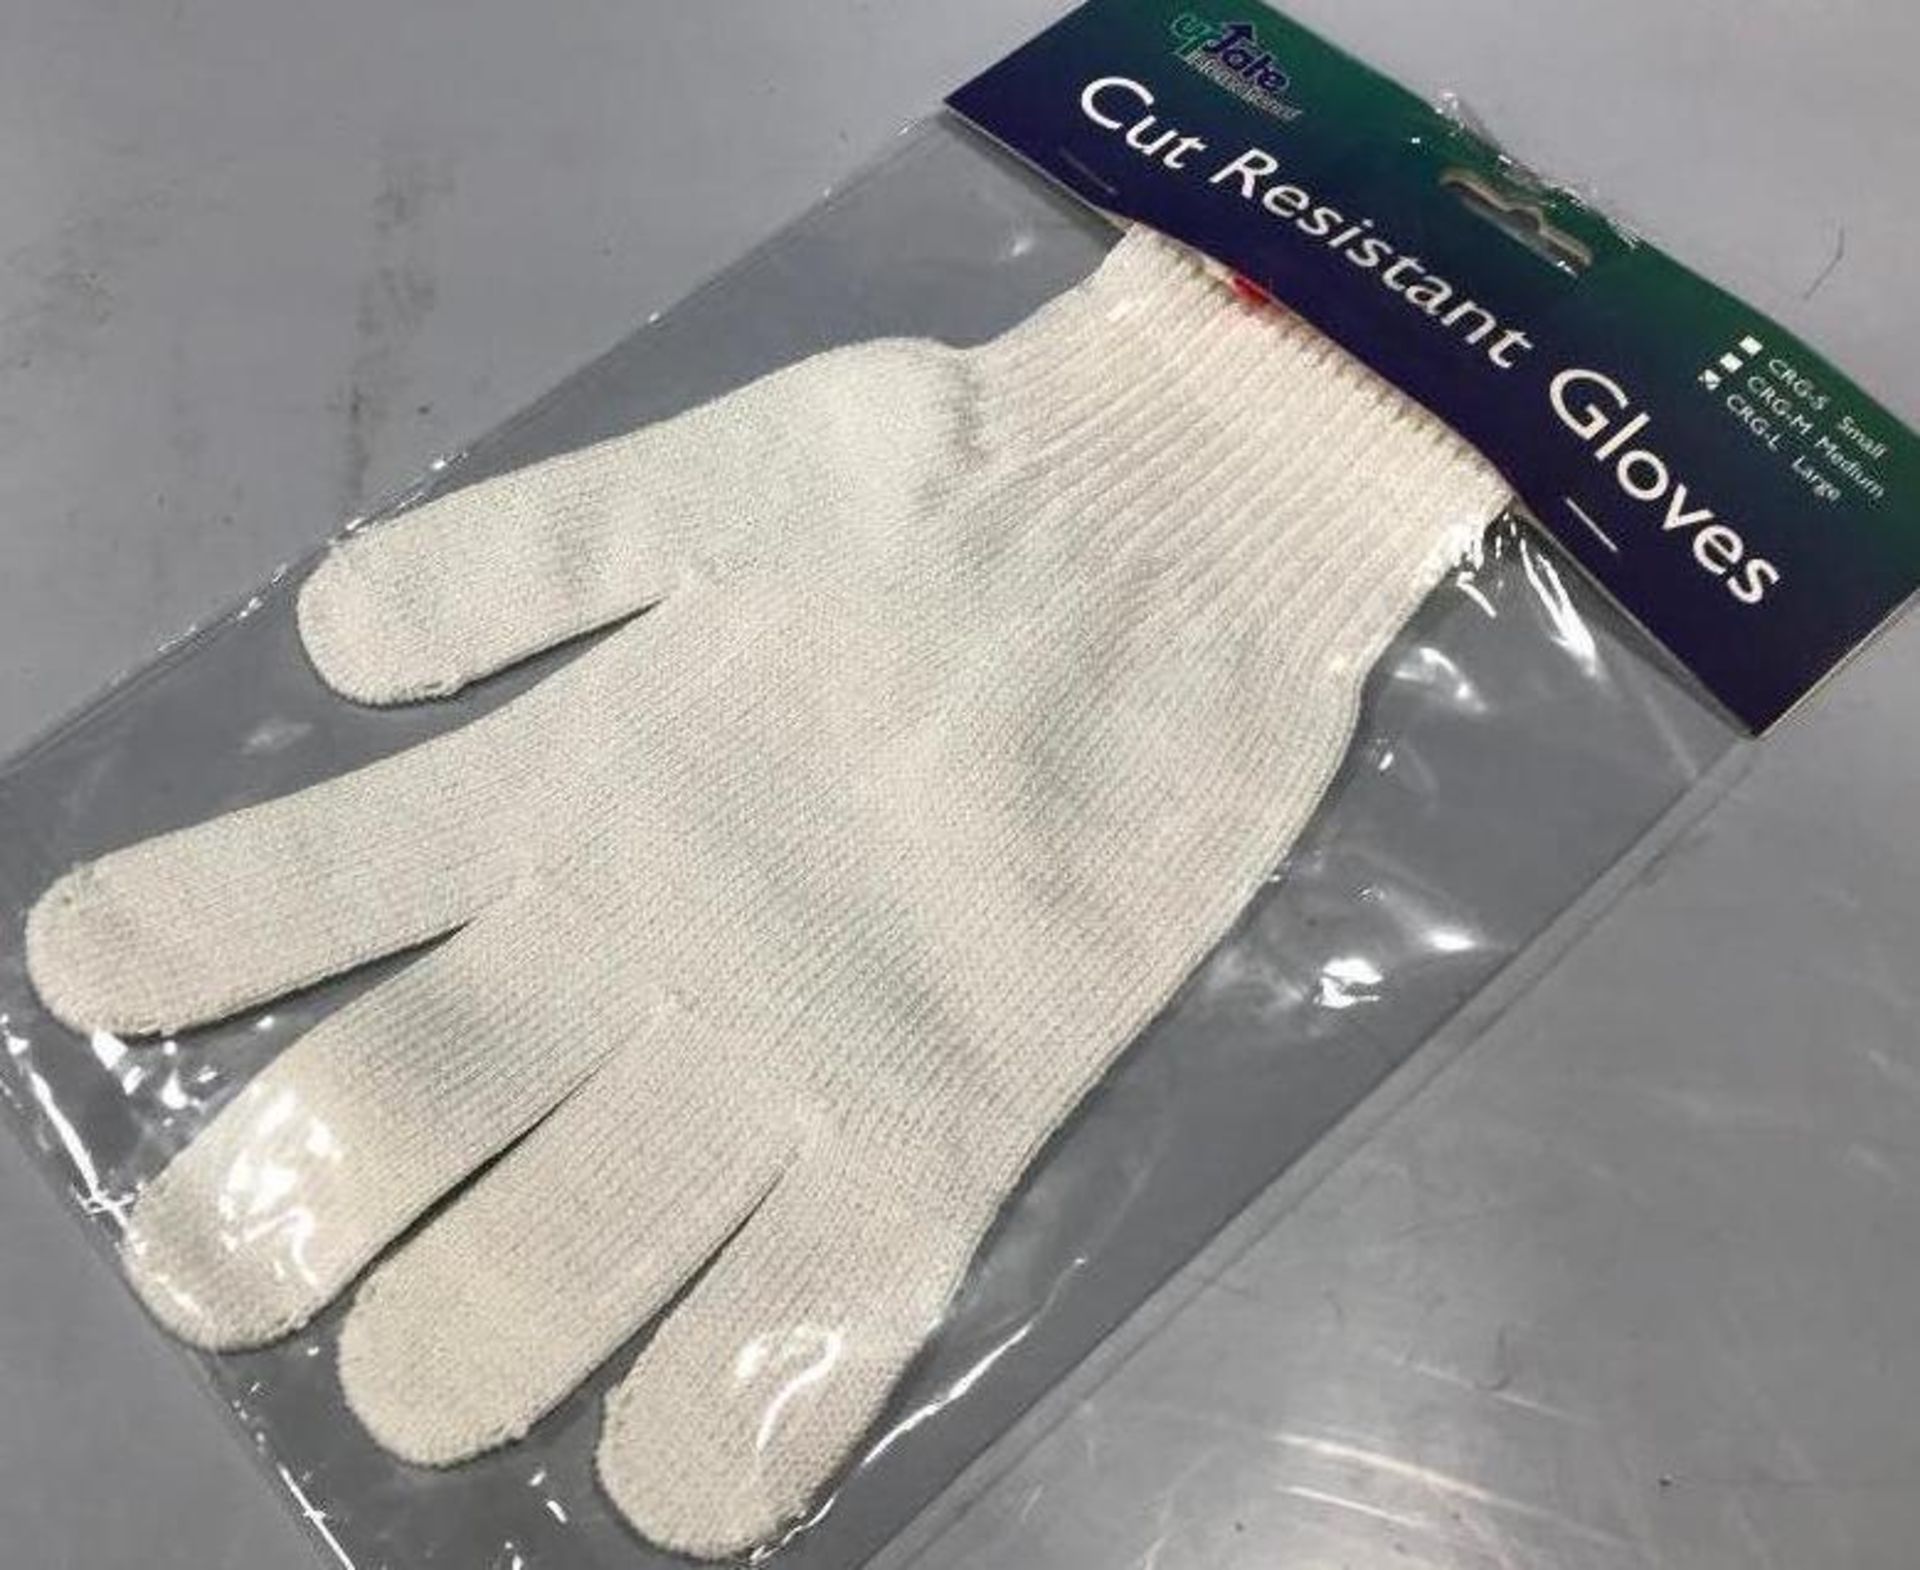 LARGE (10.25") CUT-RESISTANT GLOVE, UPDATE CRG-L - NEW - Image 3 of 3